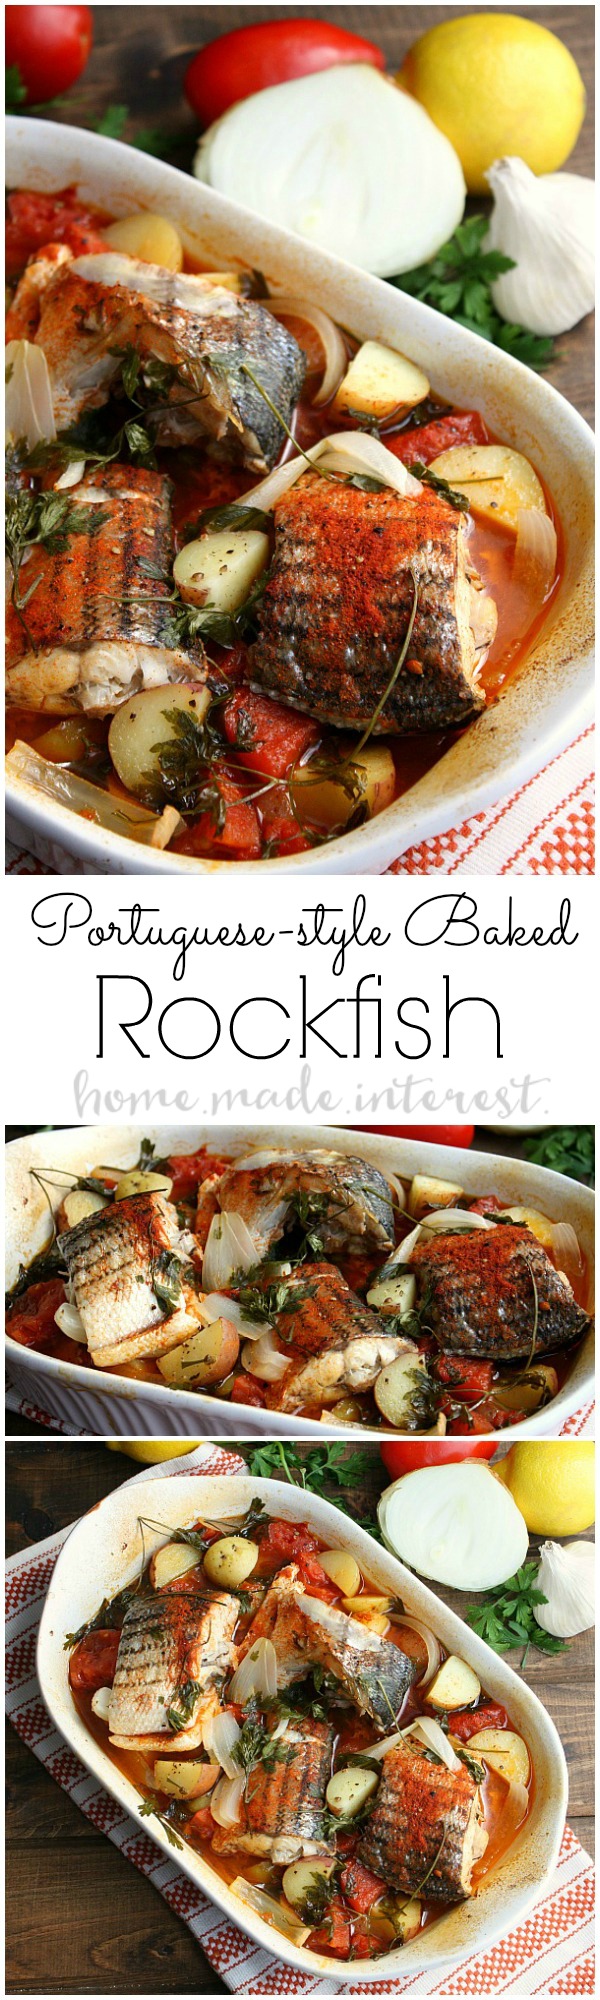 This Rockfish is baked in the Portguese style. Tomatoes, onions, and a little seasoning then baked until the fish is flakey. It is one of my favorite fish recipes and it is low calorie, low carb, and low fat. 